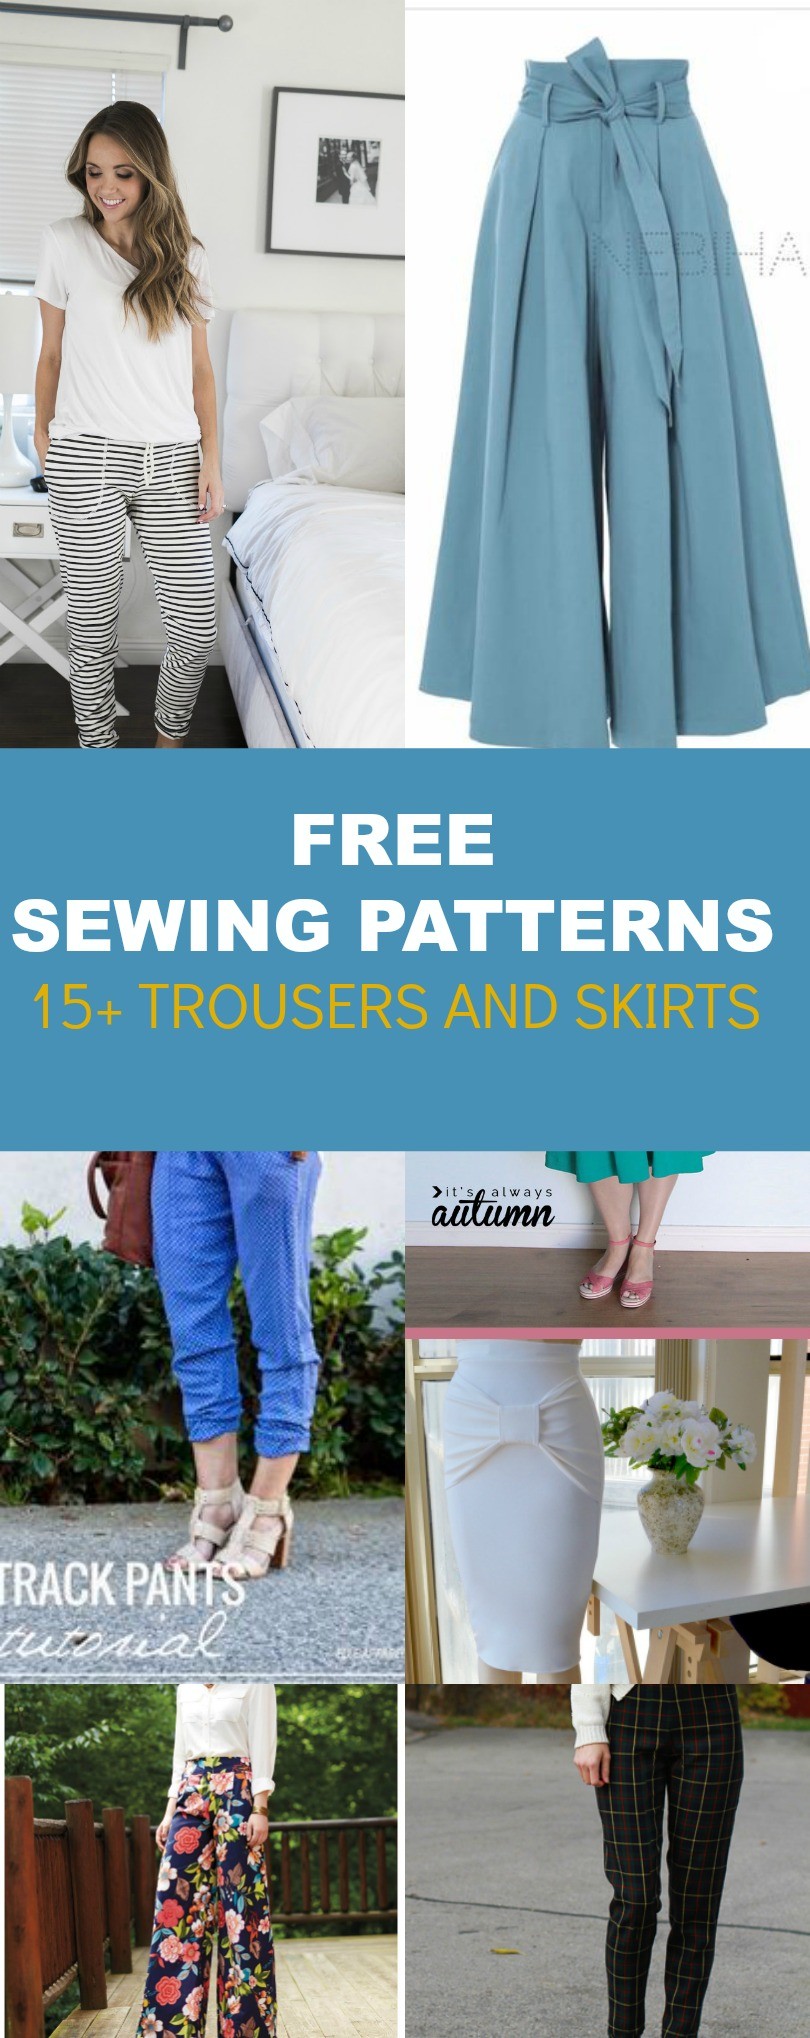 15+ Free Skirt Patterns To Sew For the Summer